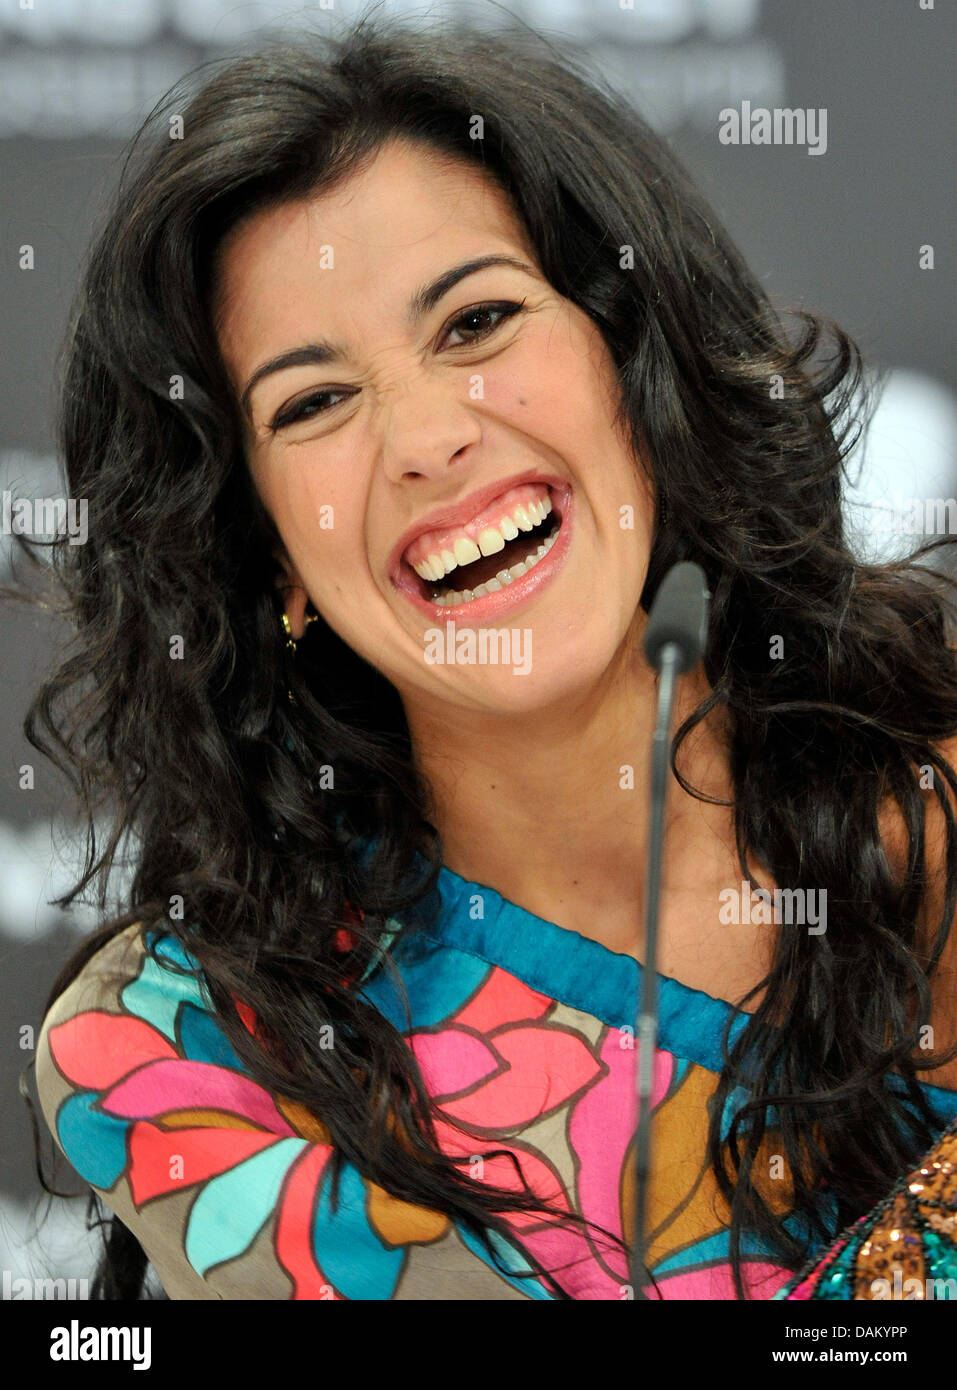 Lucia Perez representing Spain smiles during the Big 5 press conference at Eurovision Song Contest in Duesseldorf, Germany, 13 May 2011. The Final of the 56th Eurovision Song Contest takes place on 14 May 2011. Photo: Henning Kaiser dpa/lnw  +++(c) dpa - Bildfunk+++ Stock Photo